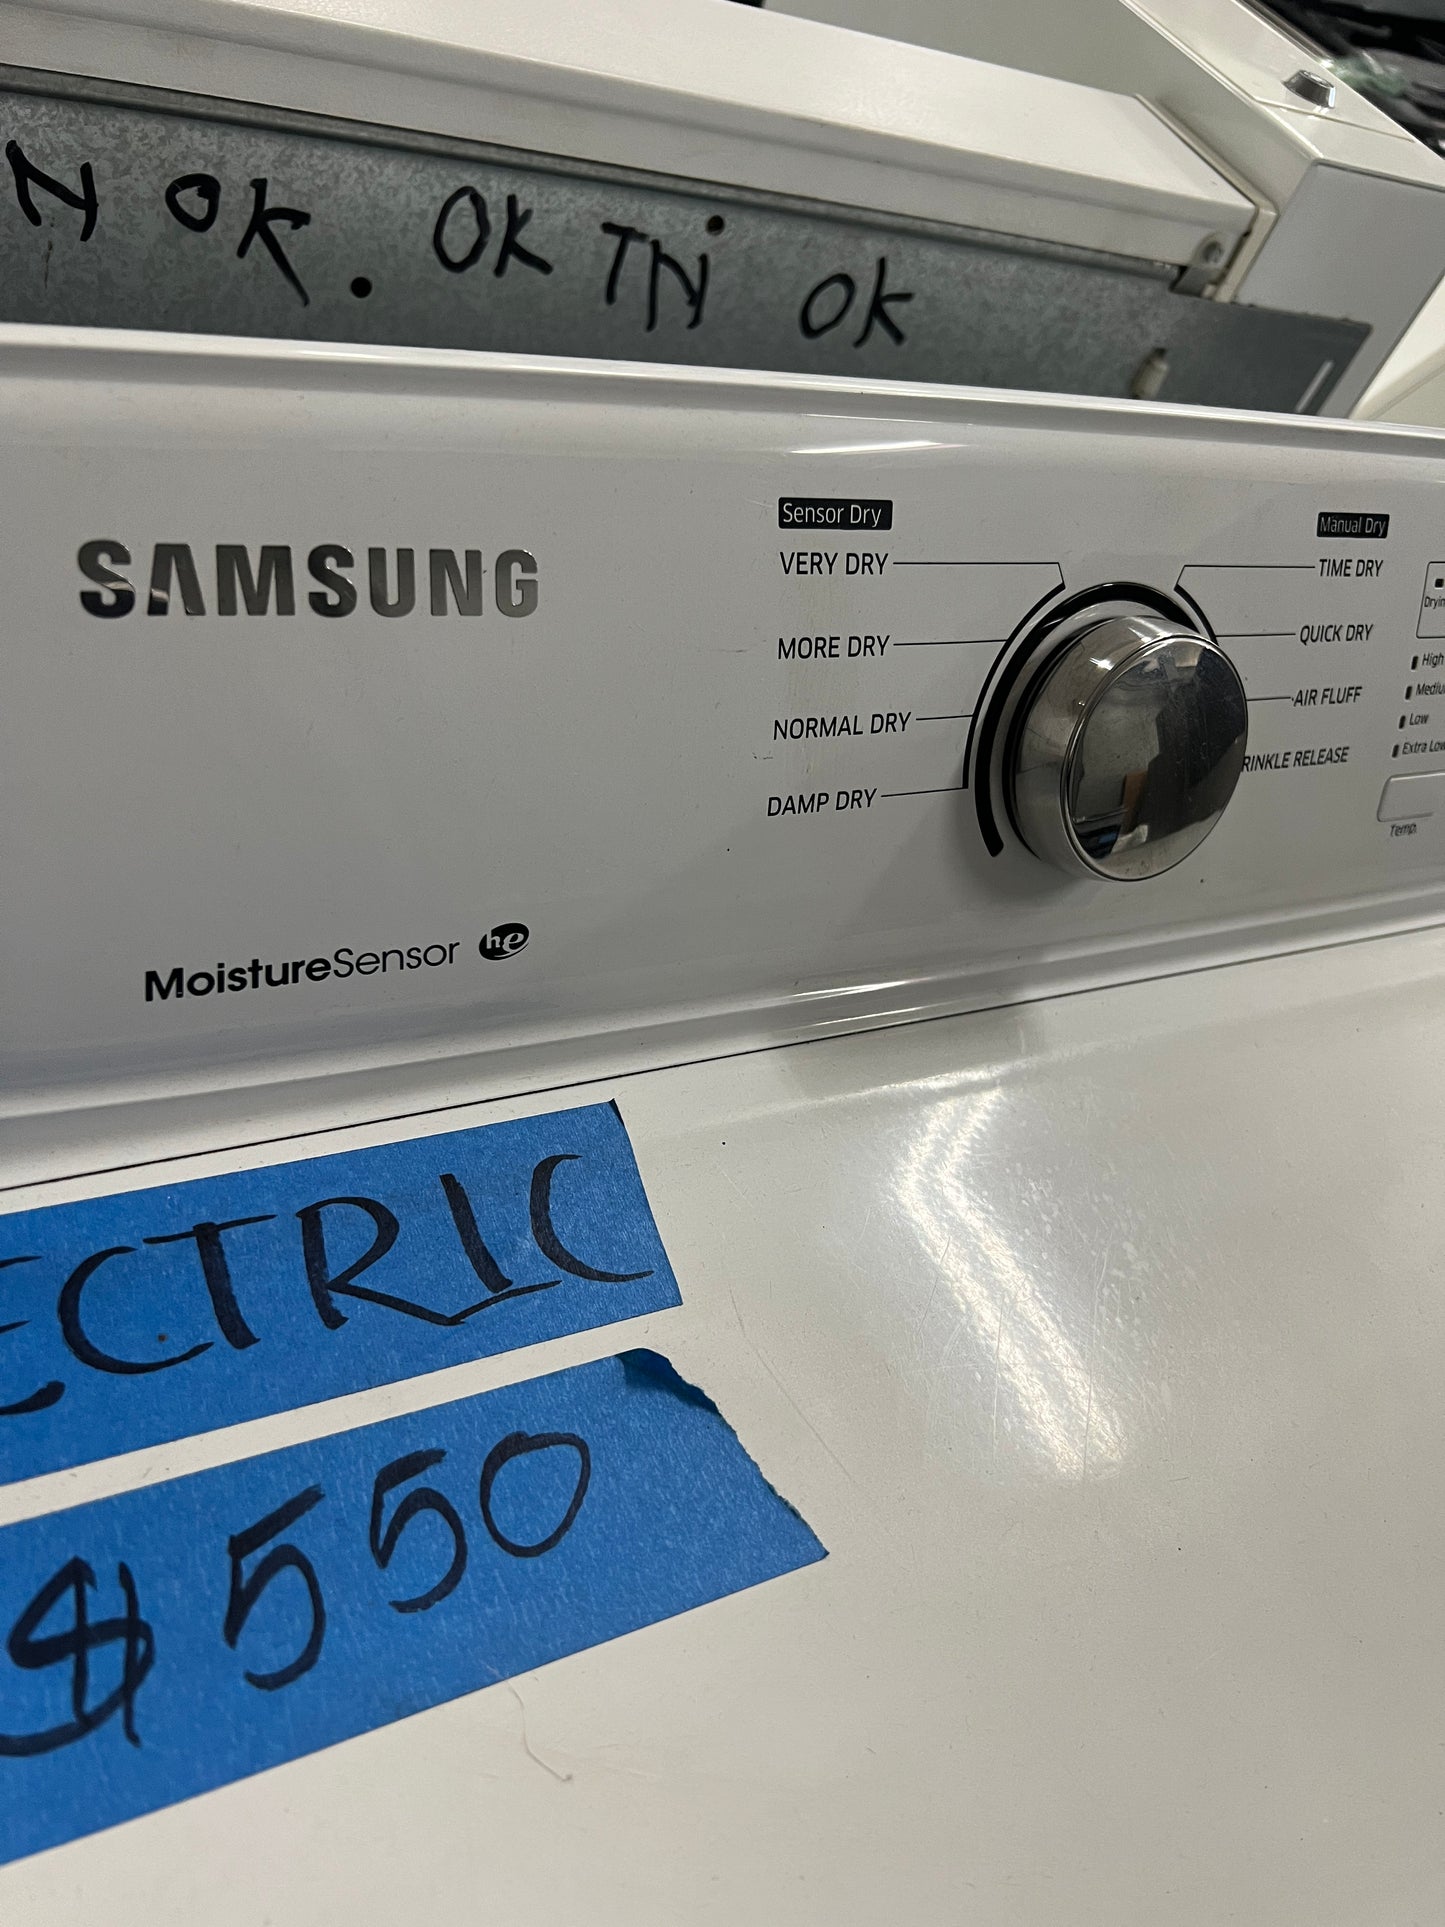 Samsung Electric Dryer in White, DV40J3000EW/A2, Delivery/Pick Up